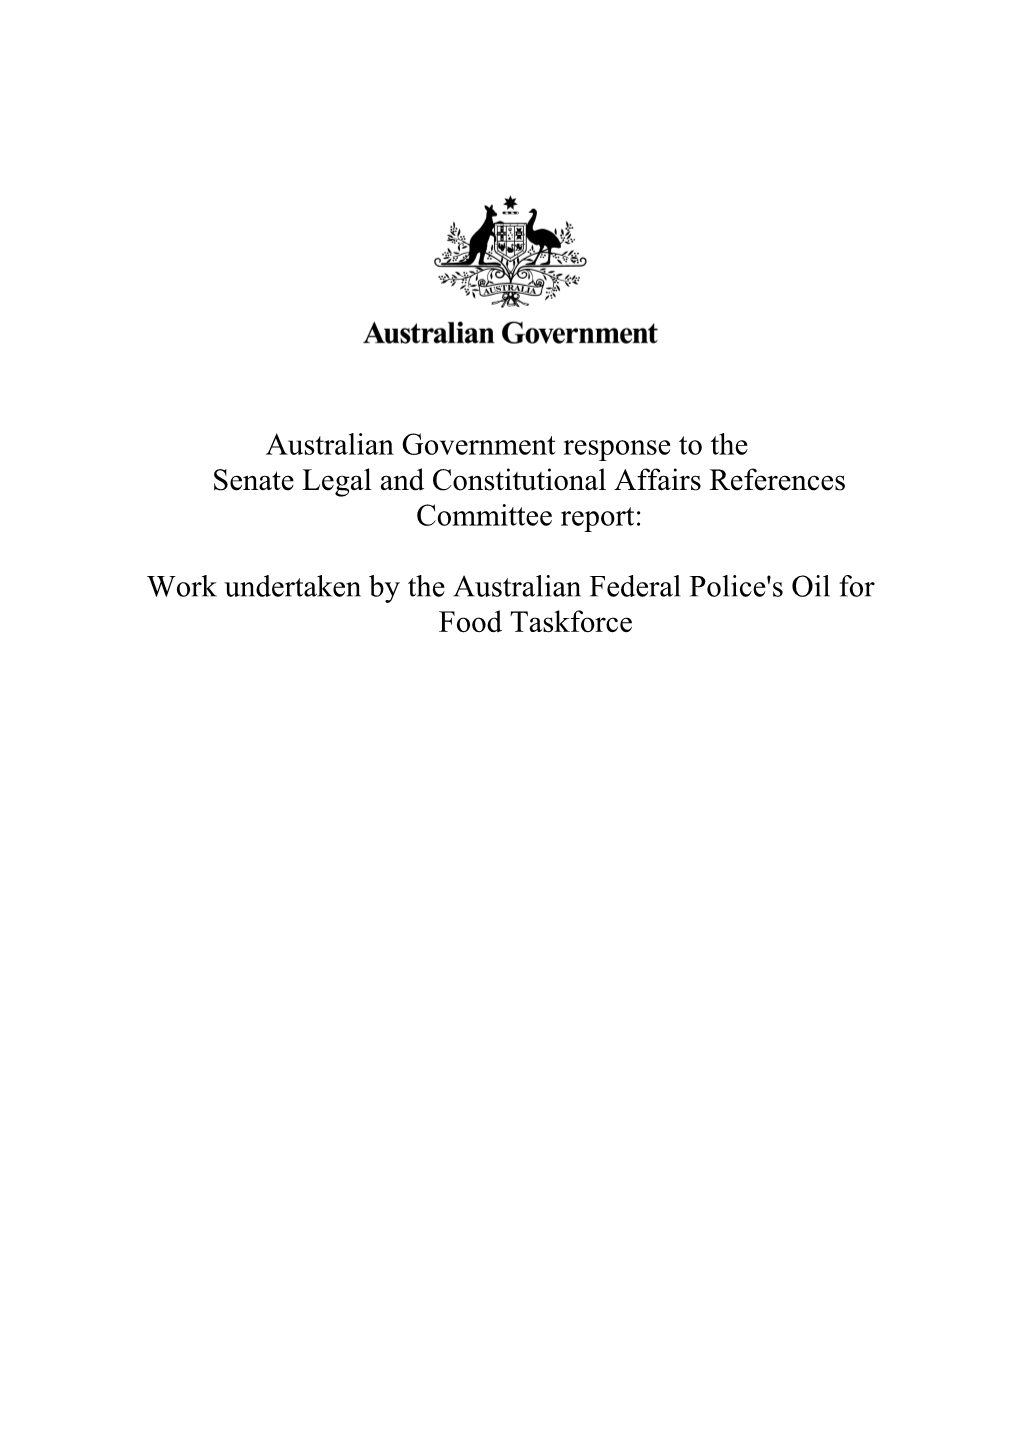 Australian Government Response to the Senate Legal and Constitutional Affairs References